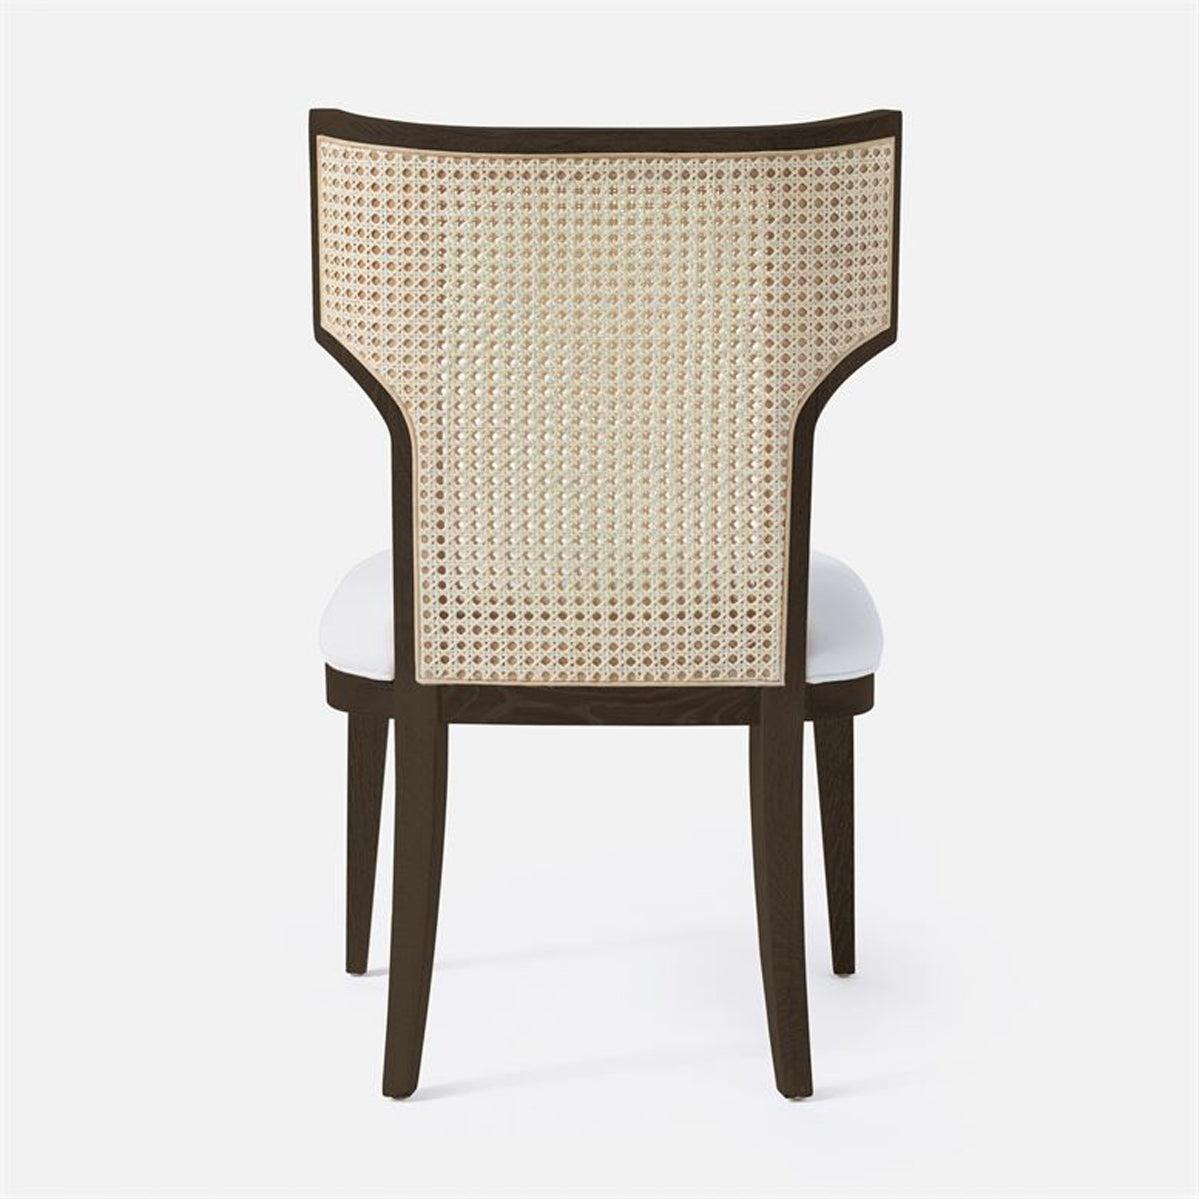 Made Goods Carleen Wingback Cane Dining Chair in Arno Fabric